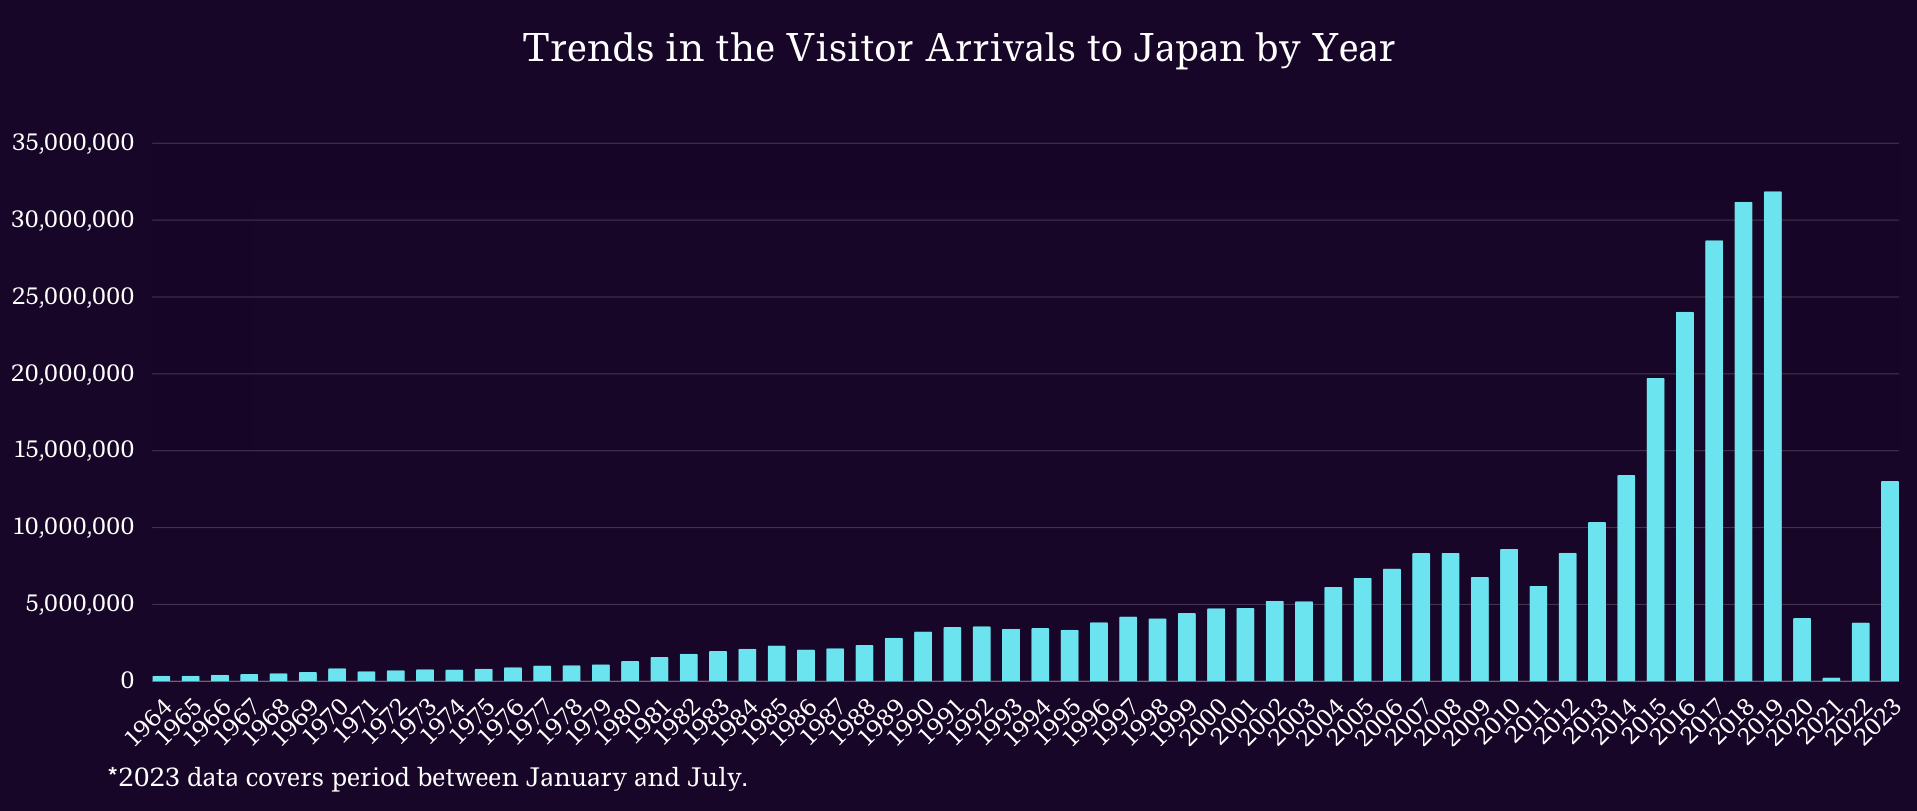 Trends in the Visitor Arrivals to Japan by Year